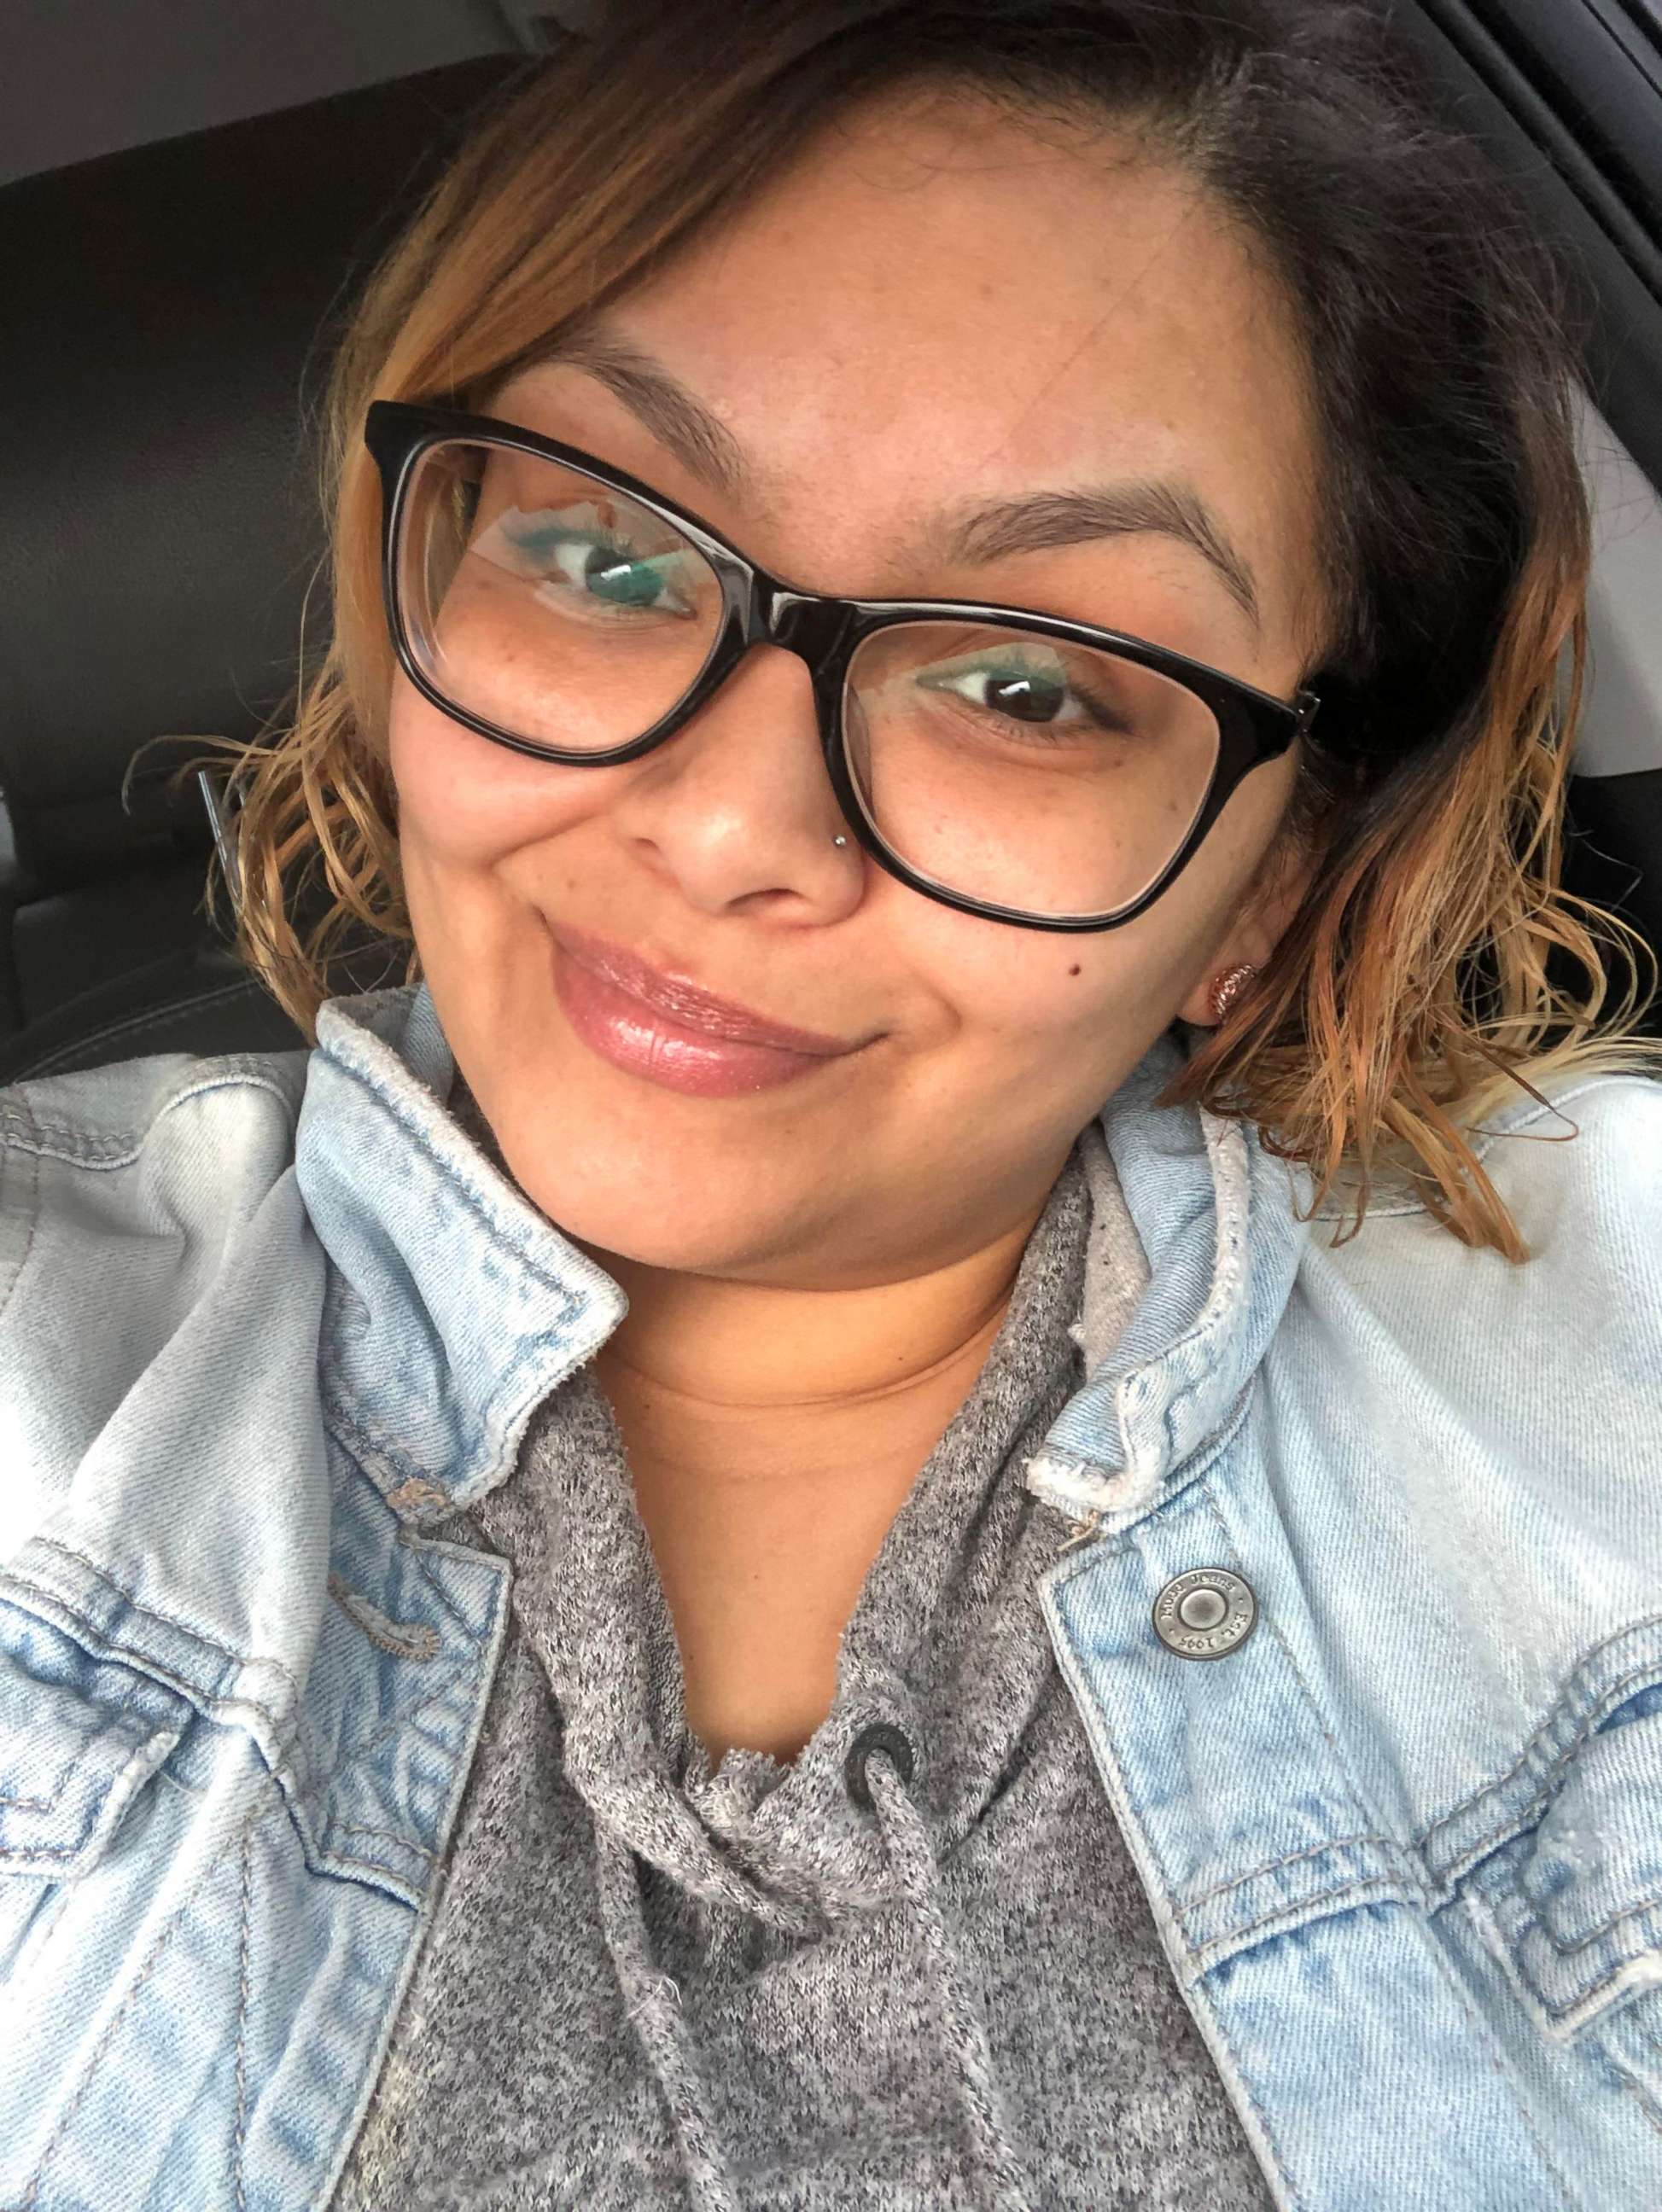 PHOTO: Keila Flores was killed when someone threw a rock onto her car from a highway overpass on Saturday, March 9, 2019.